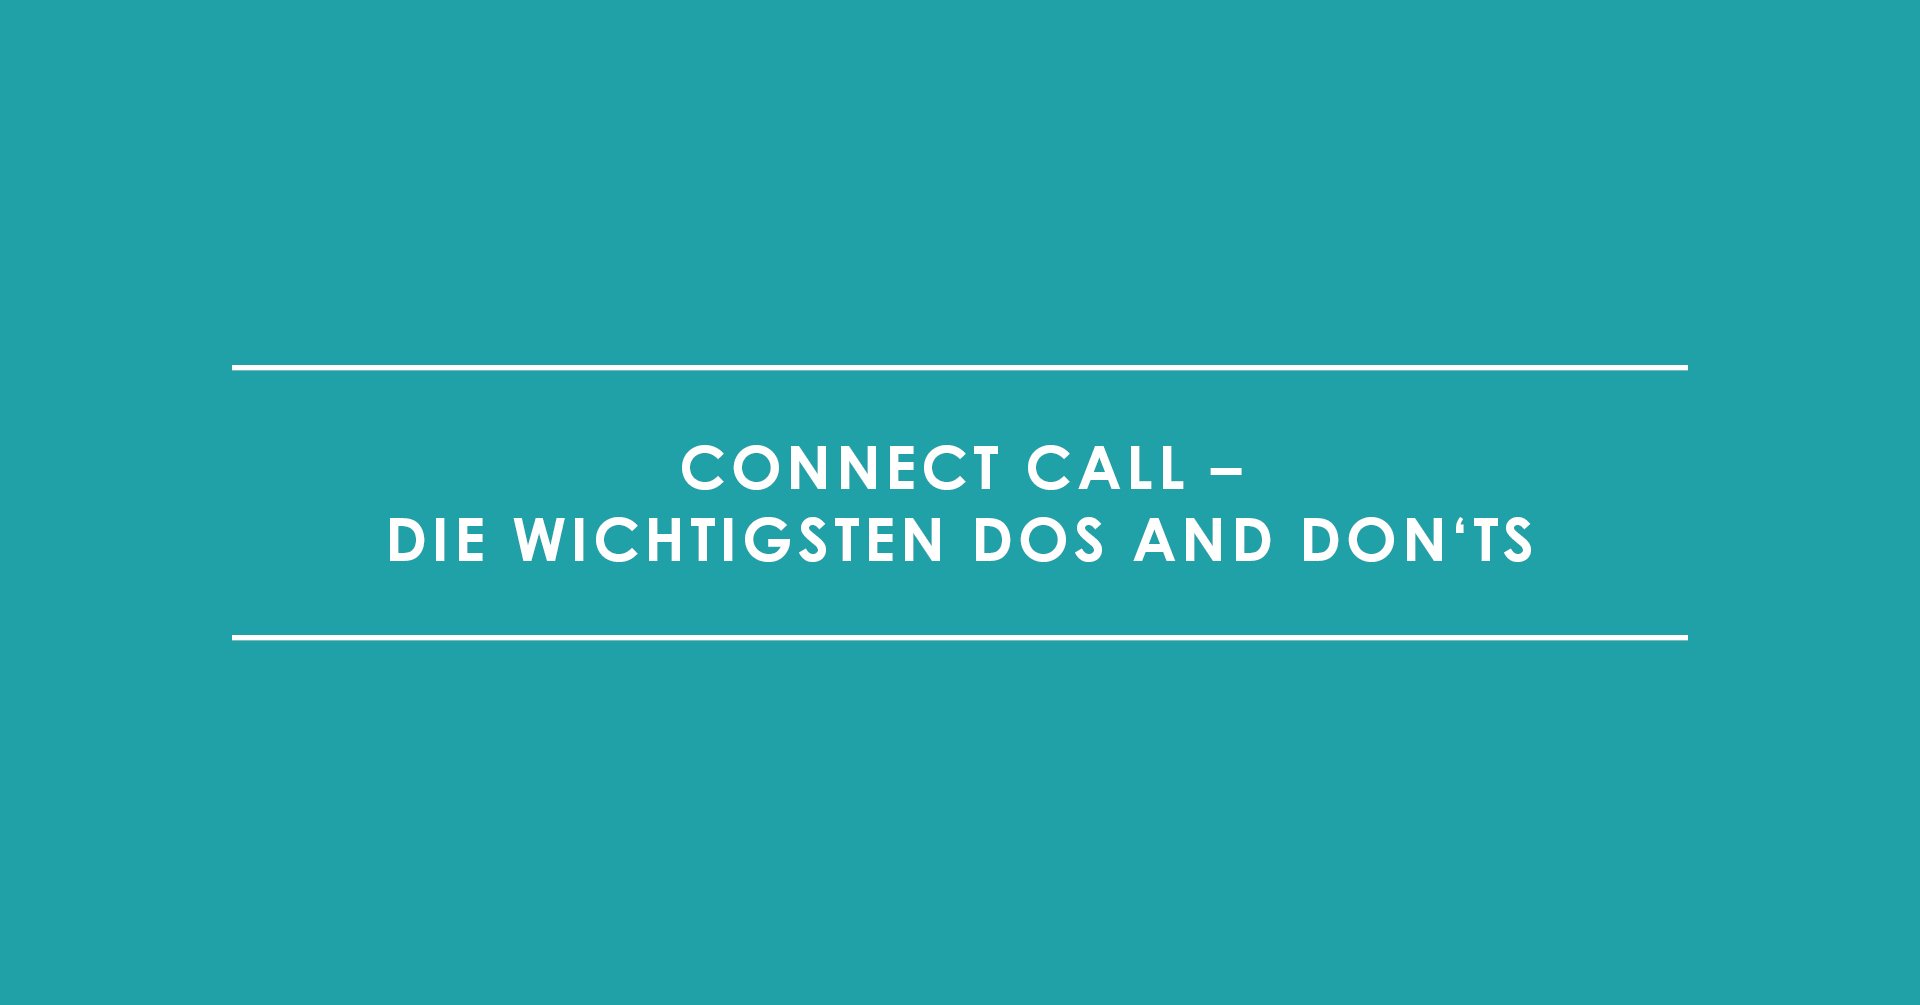 Connect Call – Die wichtigsten Dos and Don'ts